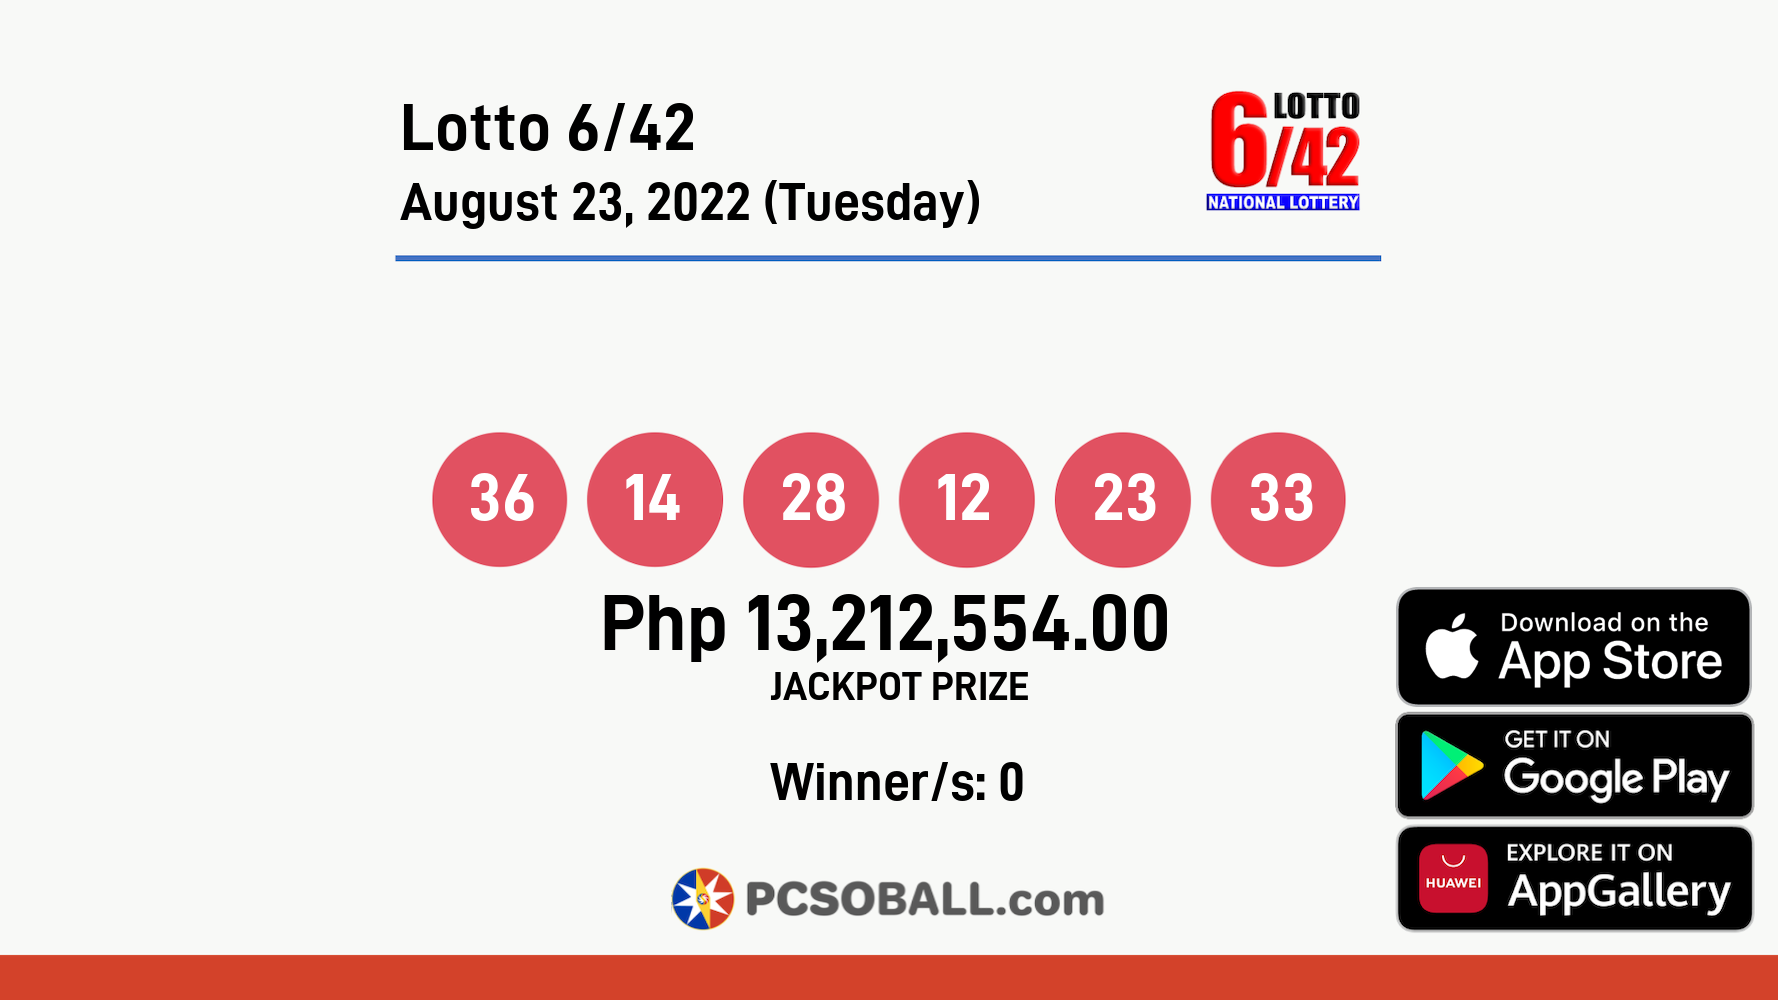 Lotto 6/42 August 23, 2022 (Tuesday) Result